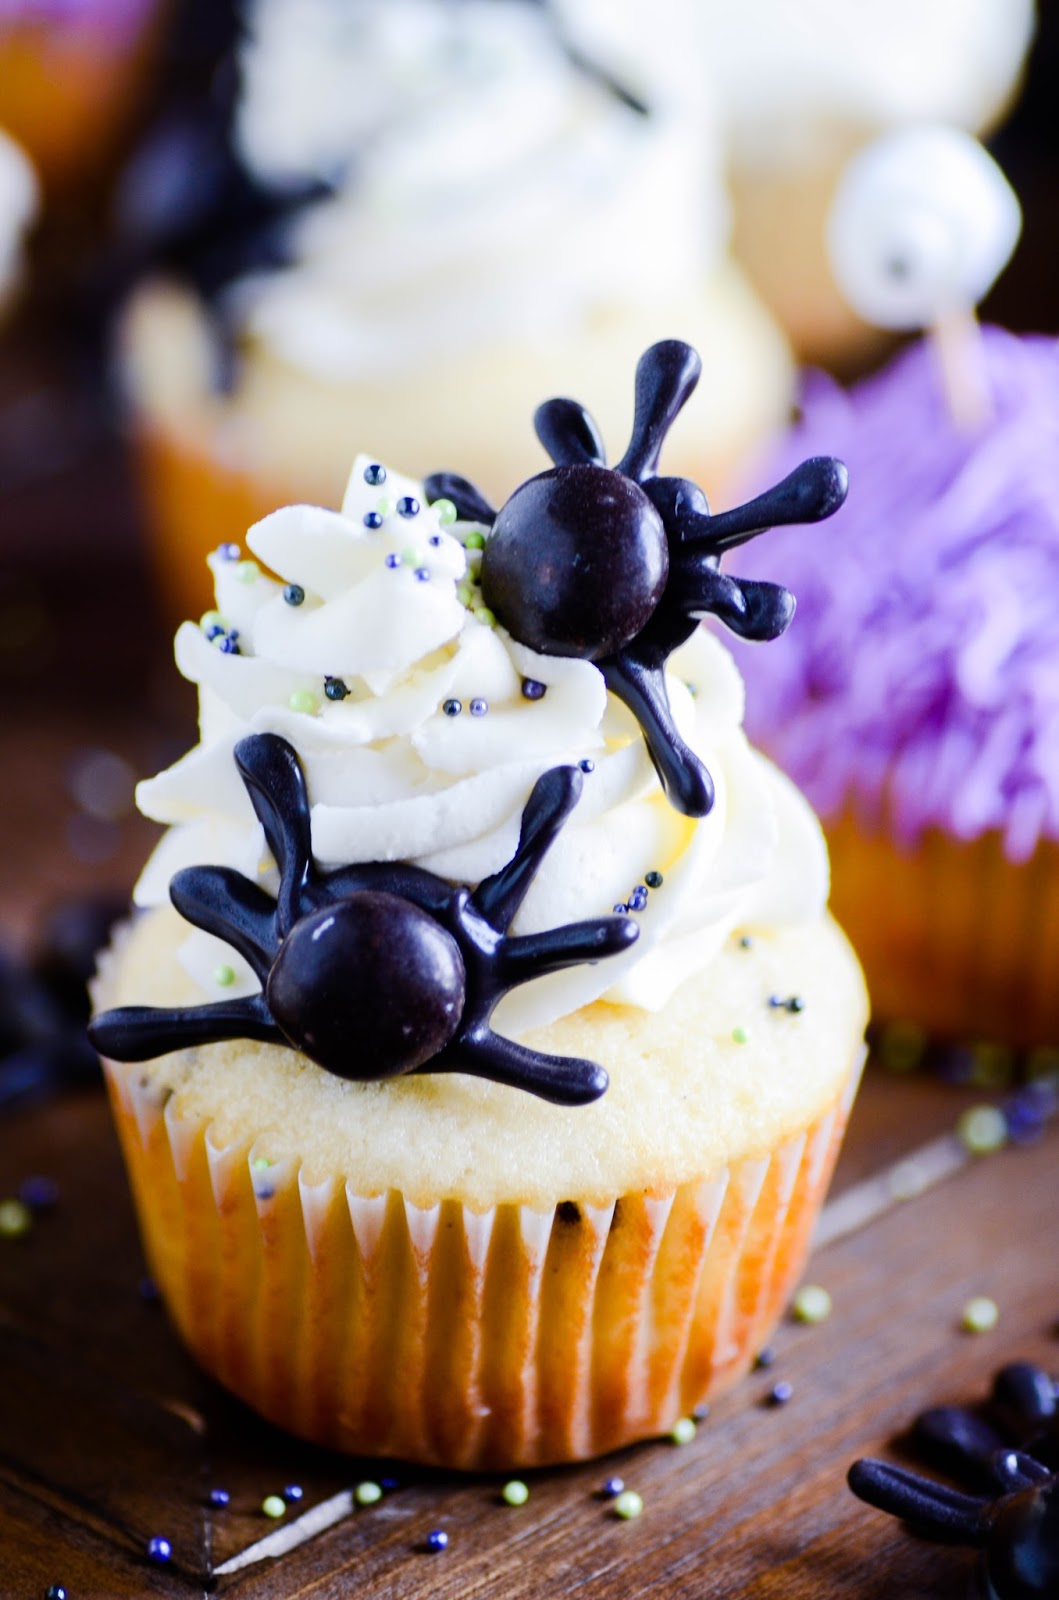 These spooky Halloween cupcakes are CRAZY EASY and eerily delicious. Grab a bag of cookies & cream M&Ms to make our easy edible black widow spiders!